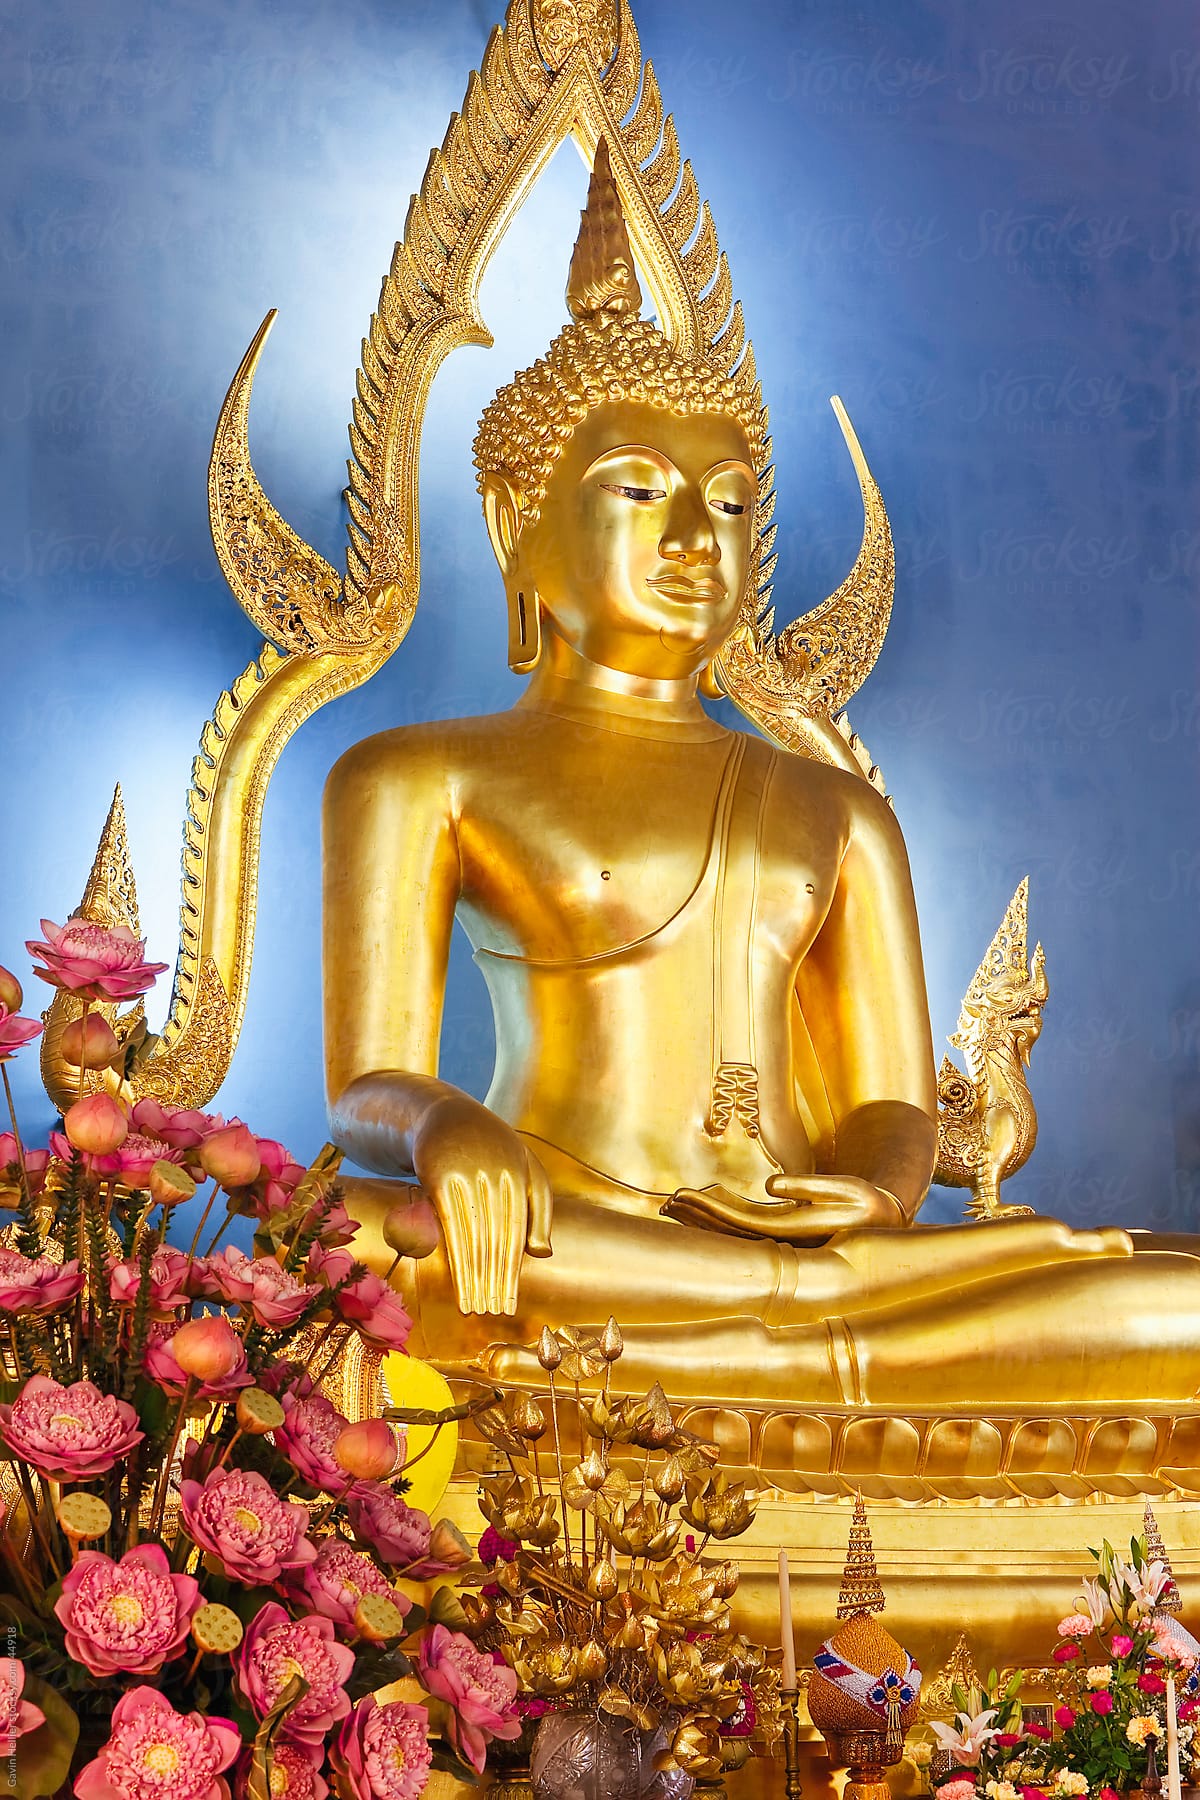 Giant golden statue of the Buddha, Wat Benchamabophit (Marble Temple), Bangkok, Thailand, Southeast Asia, Asia